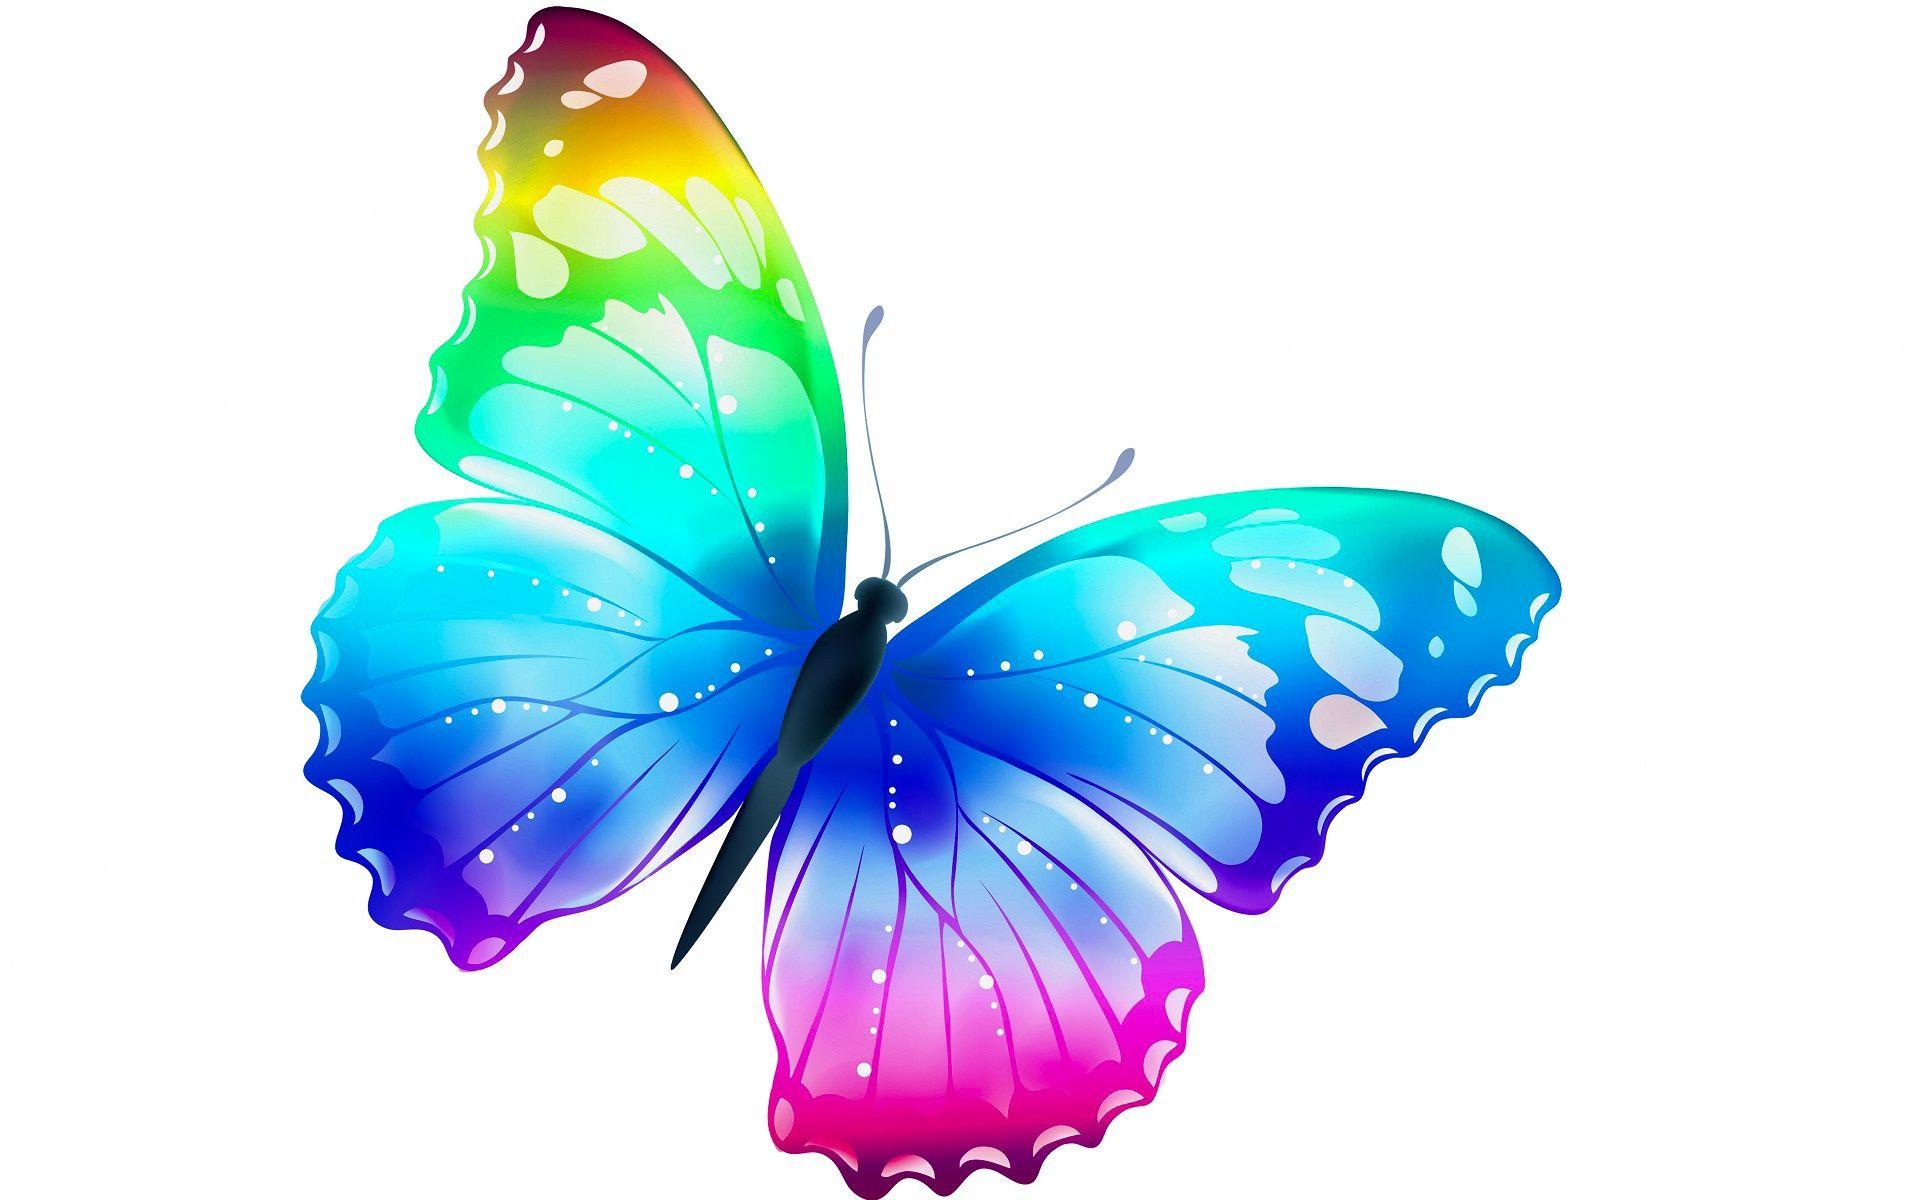 Rainbow Butterfly Wallpapers - Top Free Rainbow Butterfly Backgrounds